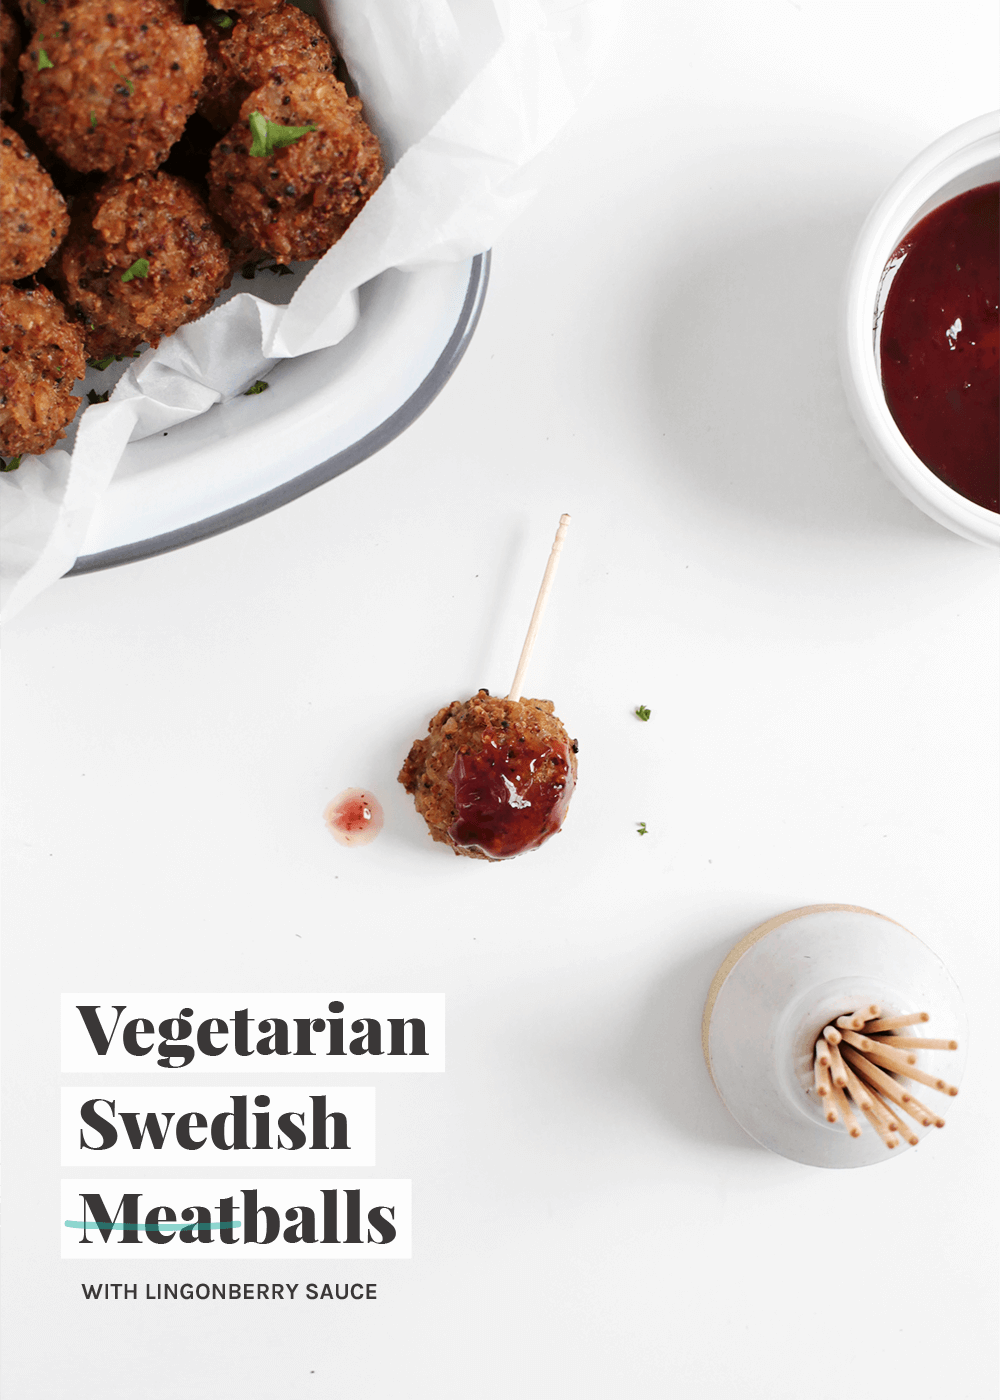 Vegetarian Swedish Meatballs with a lingonberry sauce from The Fauxmartha